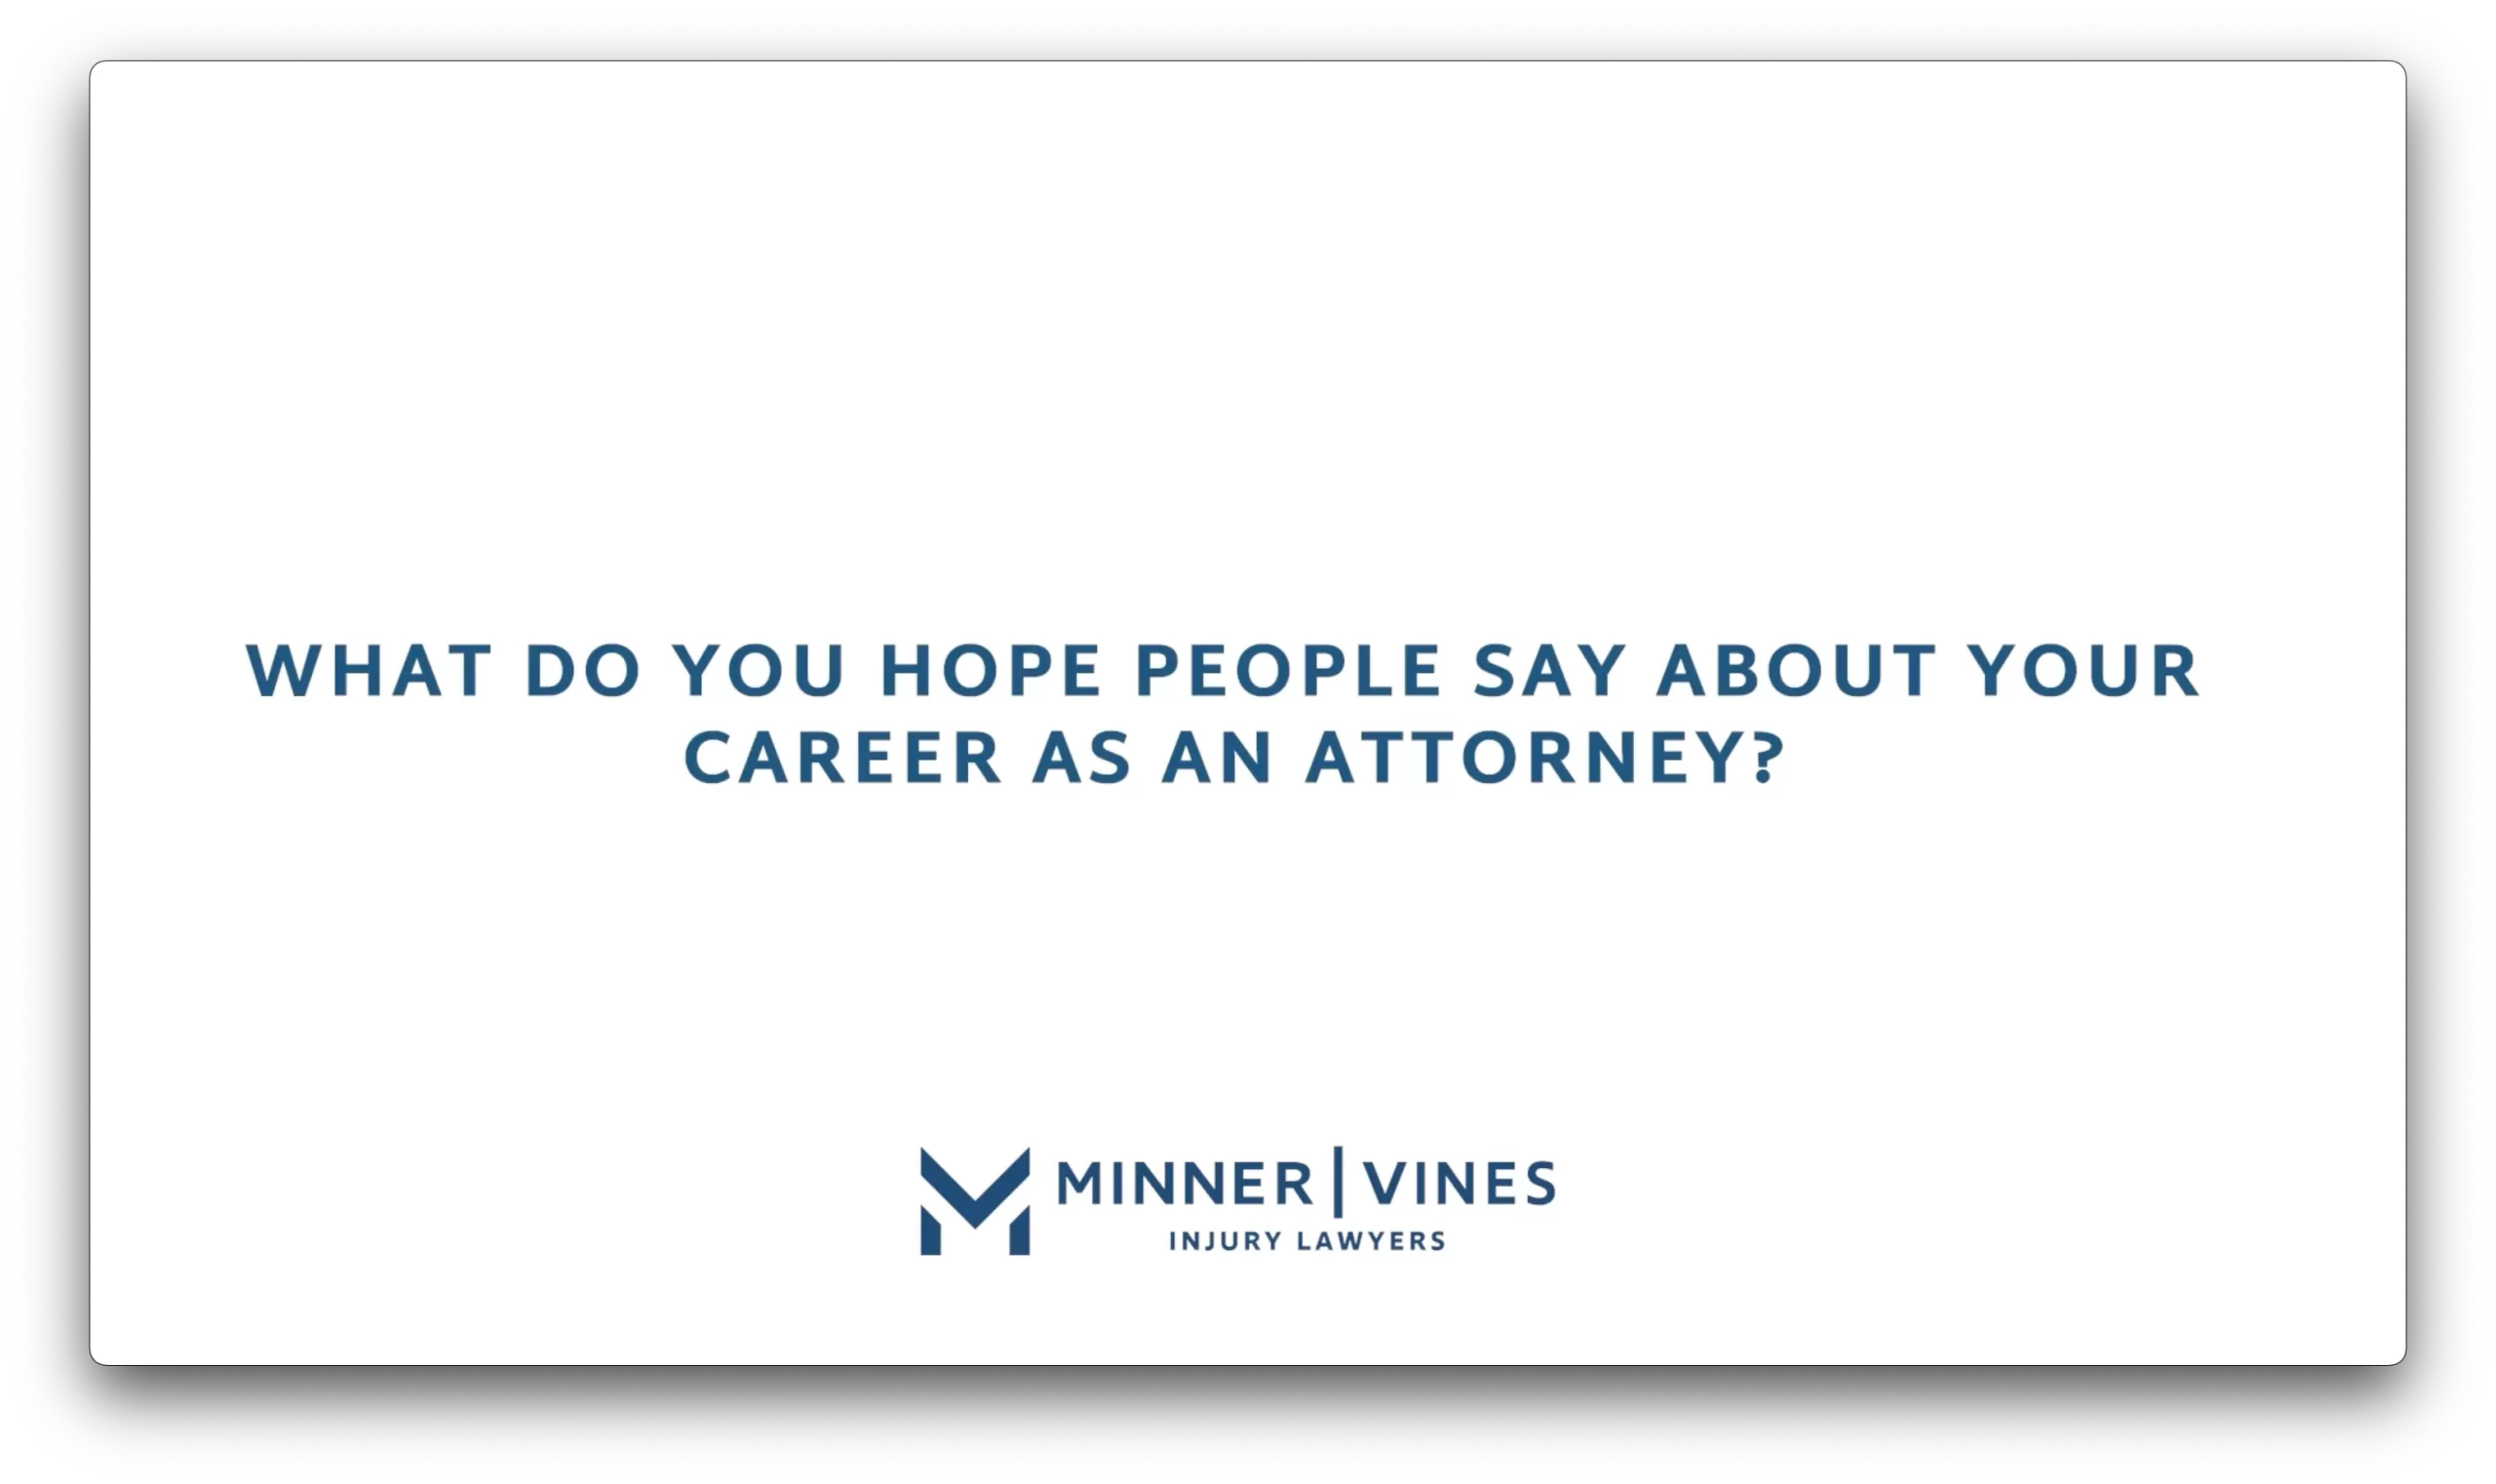 What do you hope people say about your career as an attorney?